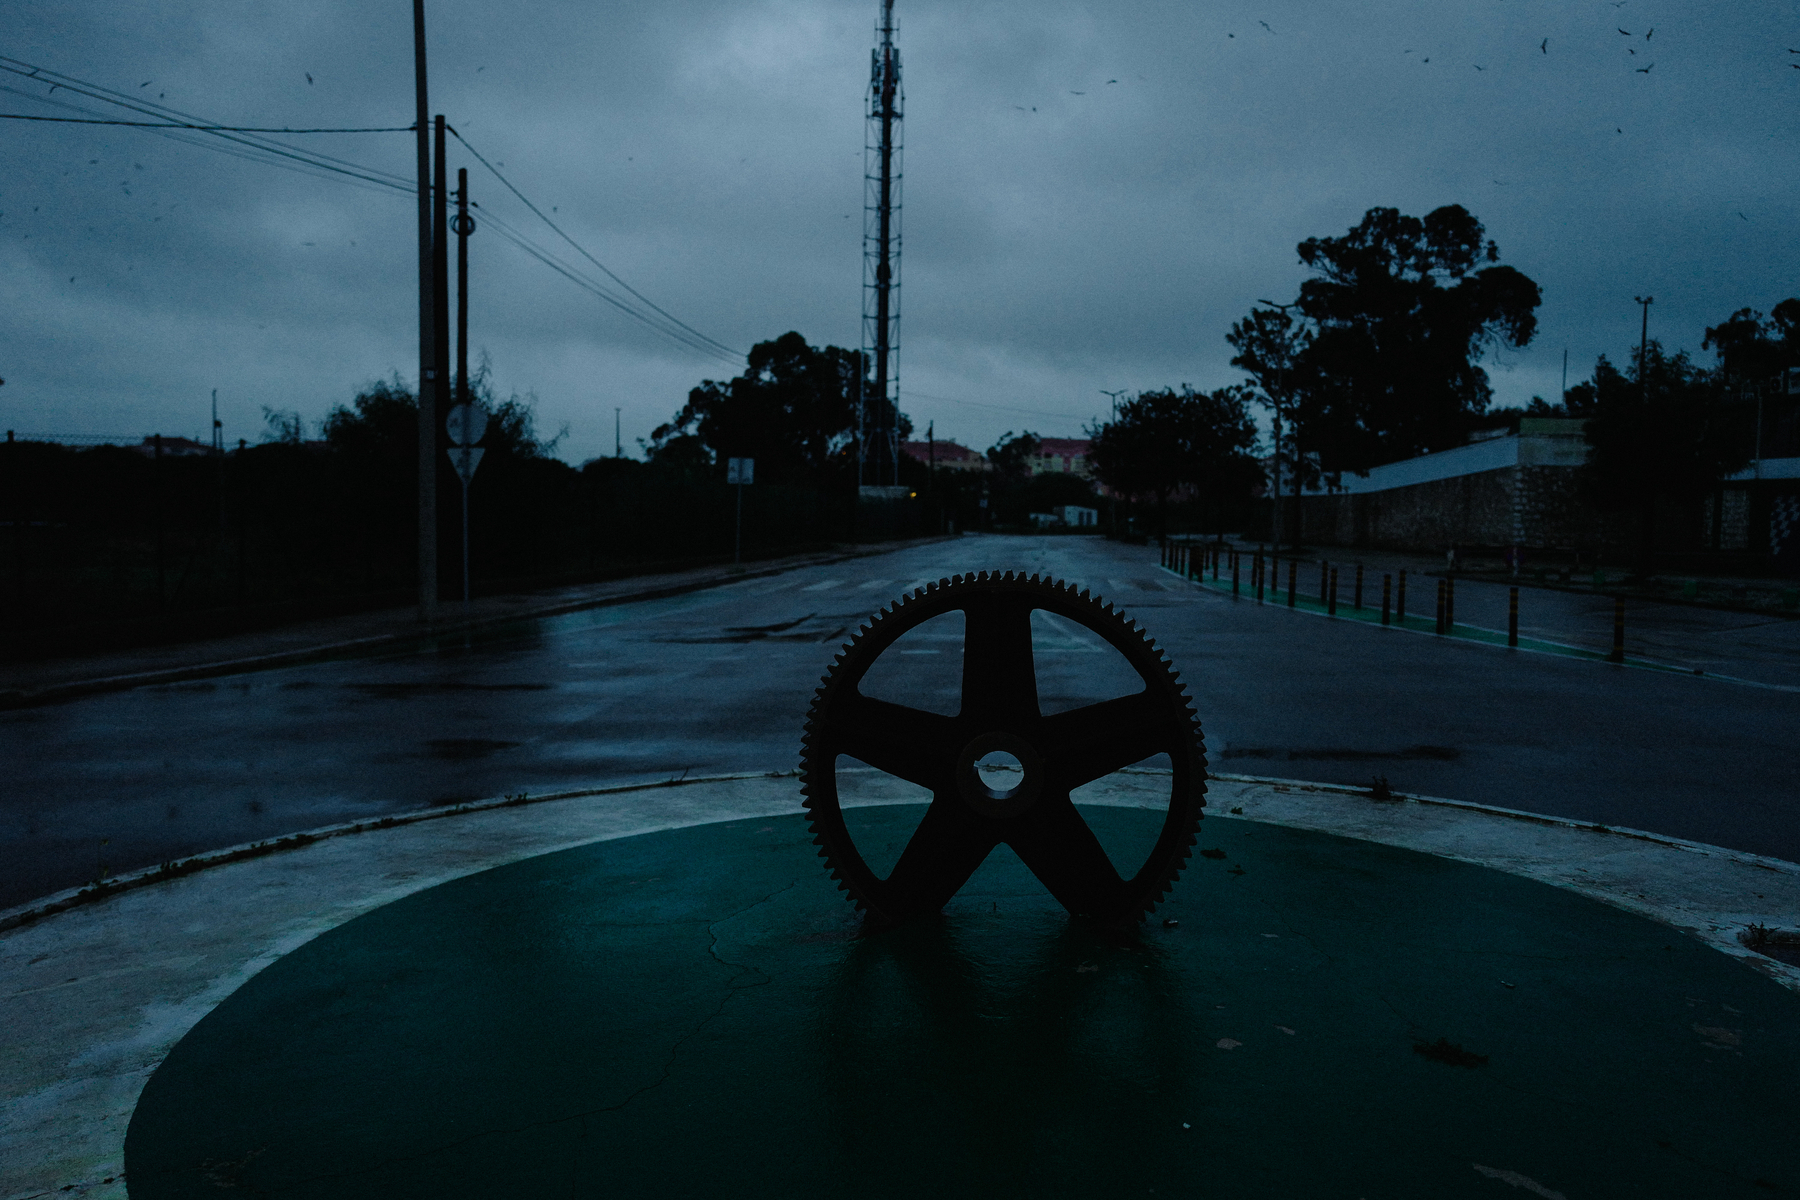 A large gear sculpture on a green circular base in the center of a deserted street at dusk, with a dark cloudy sky and faint silhouettes of birds flying above.